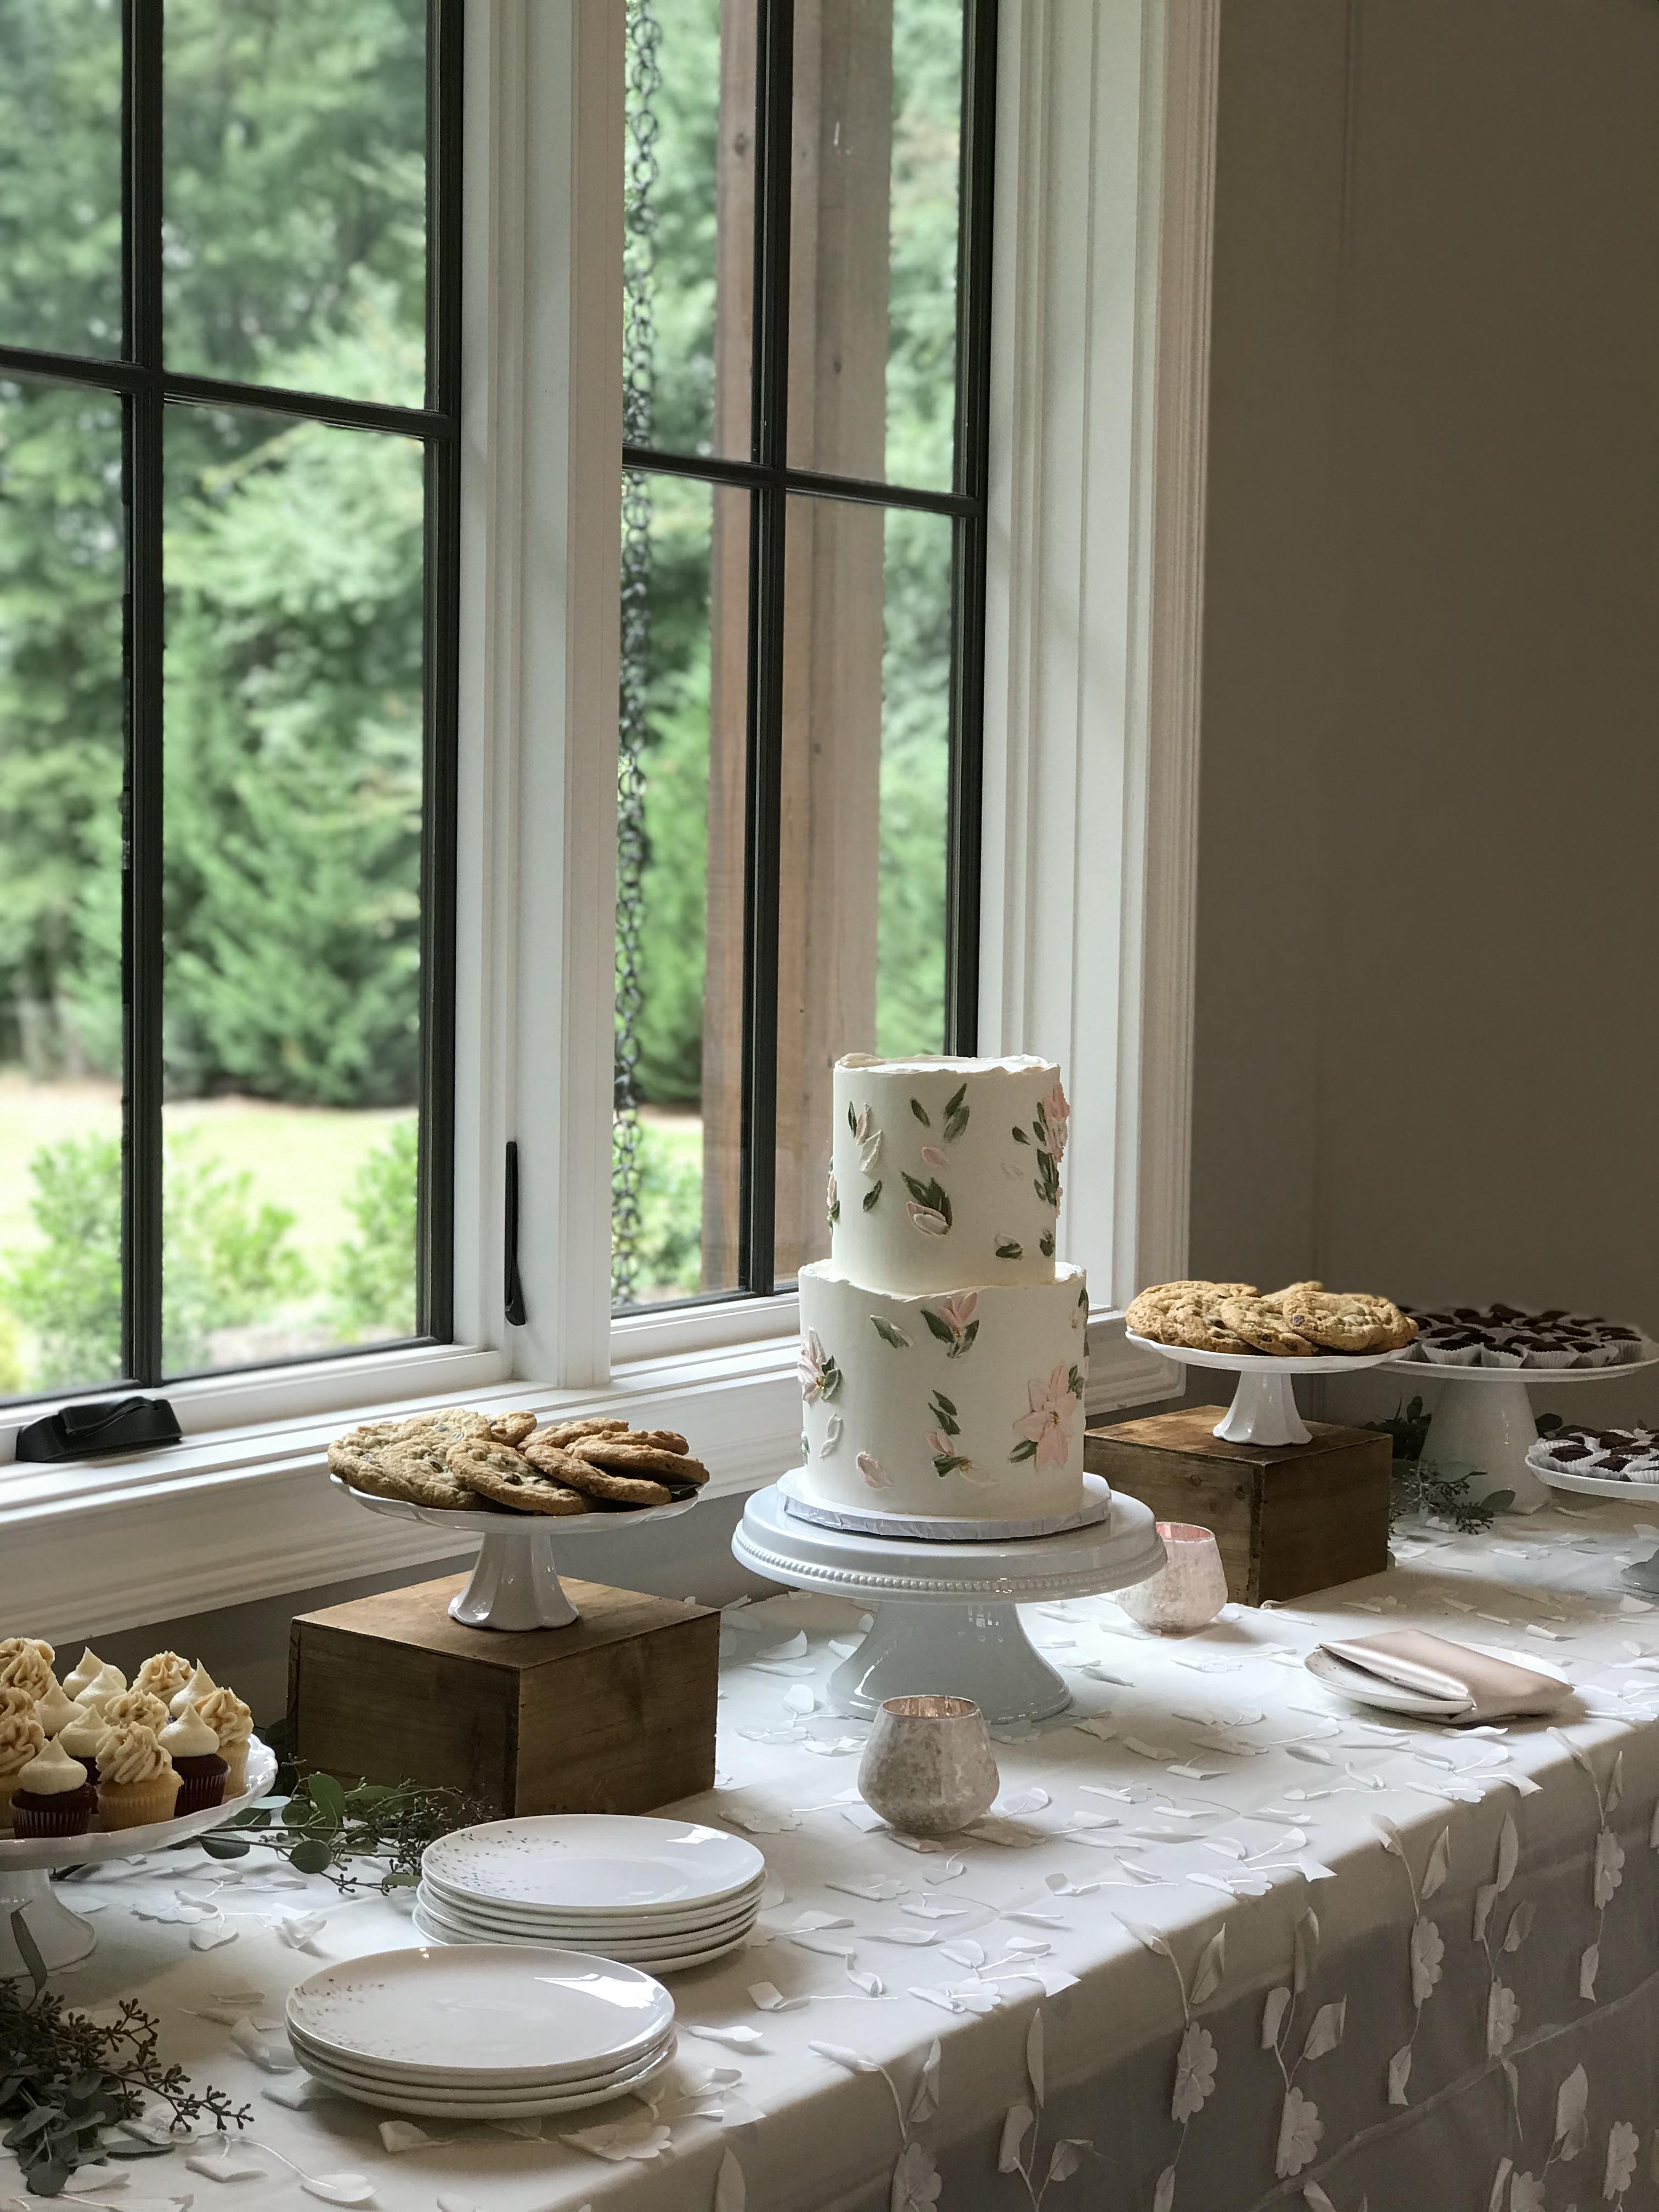 Parties and Receptions - The Cupcake Shoppe